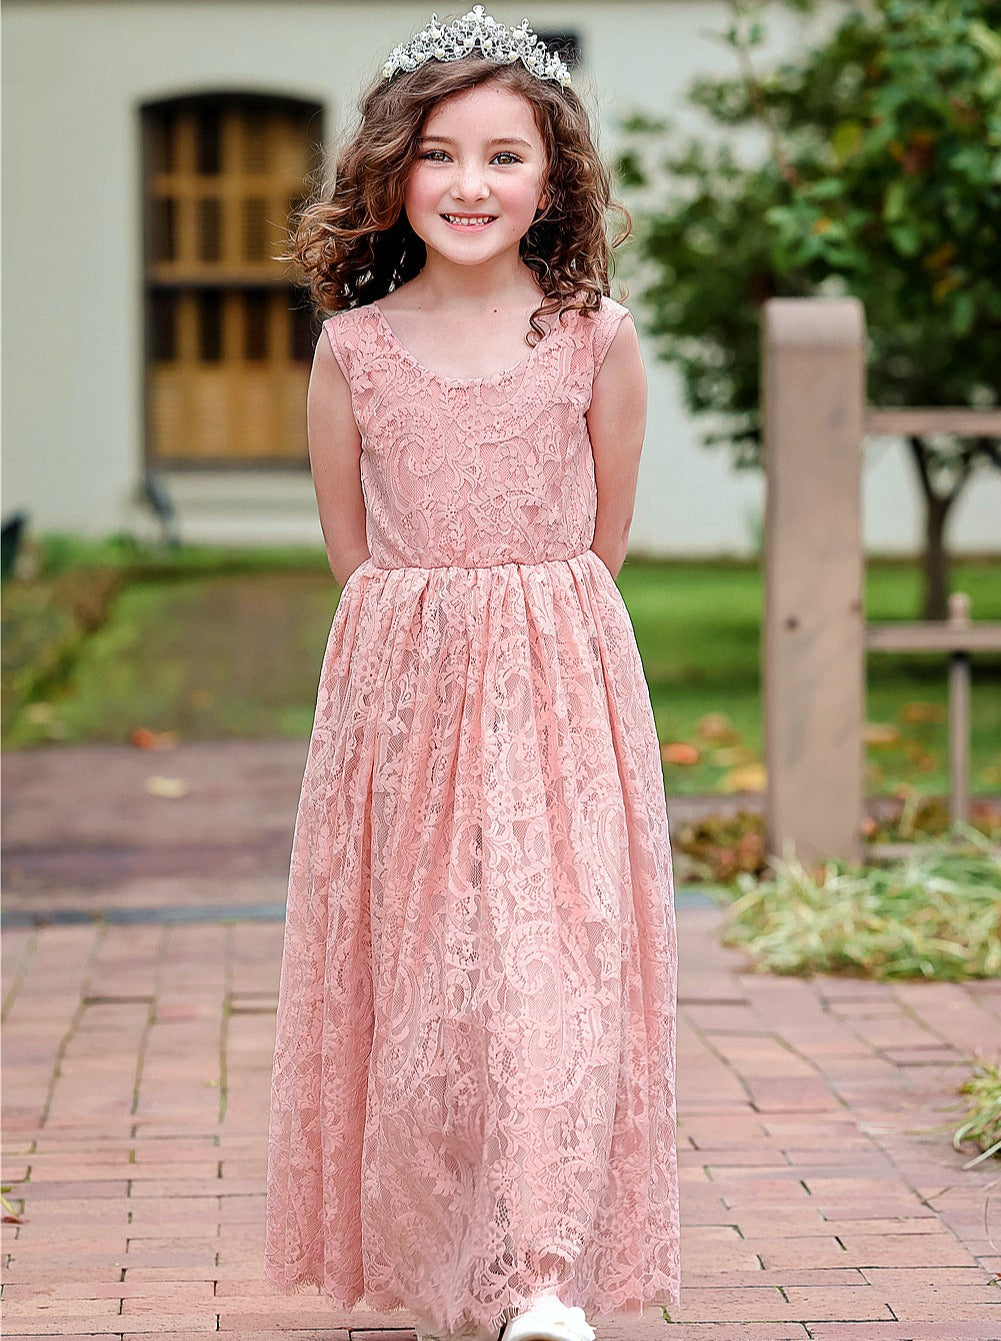 Paisley All Lace A-Line Girl Dress in Dusty Pink - 2BUNNIES